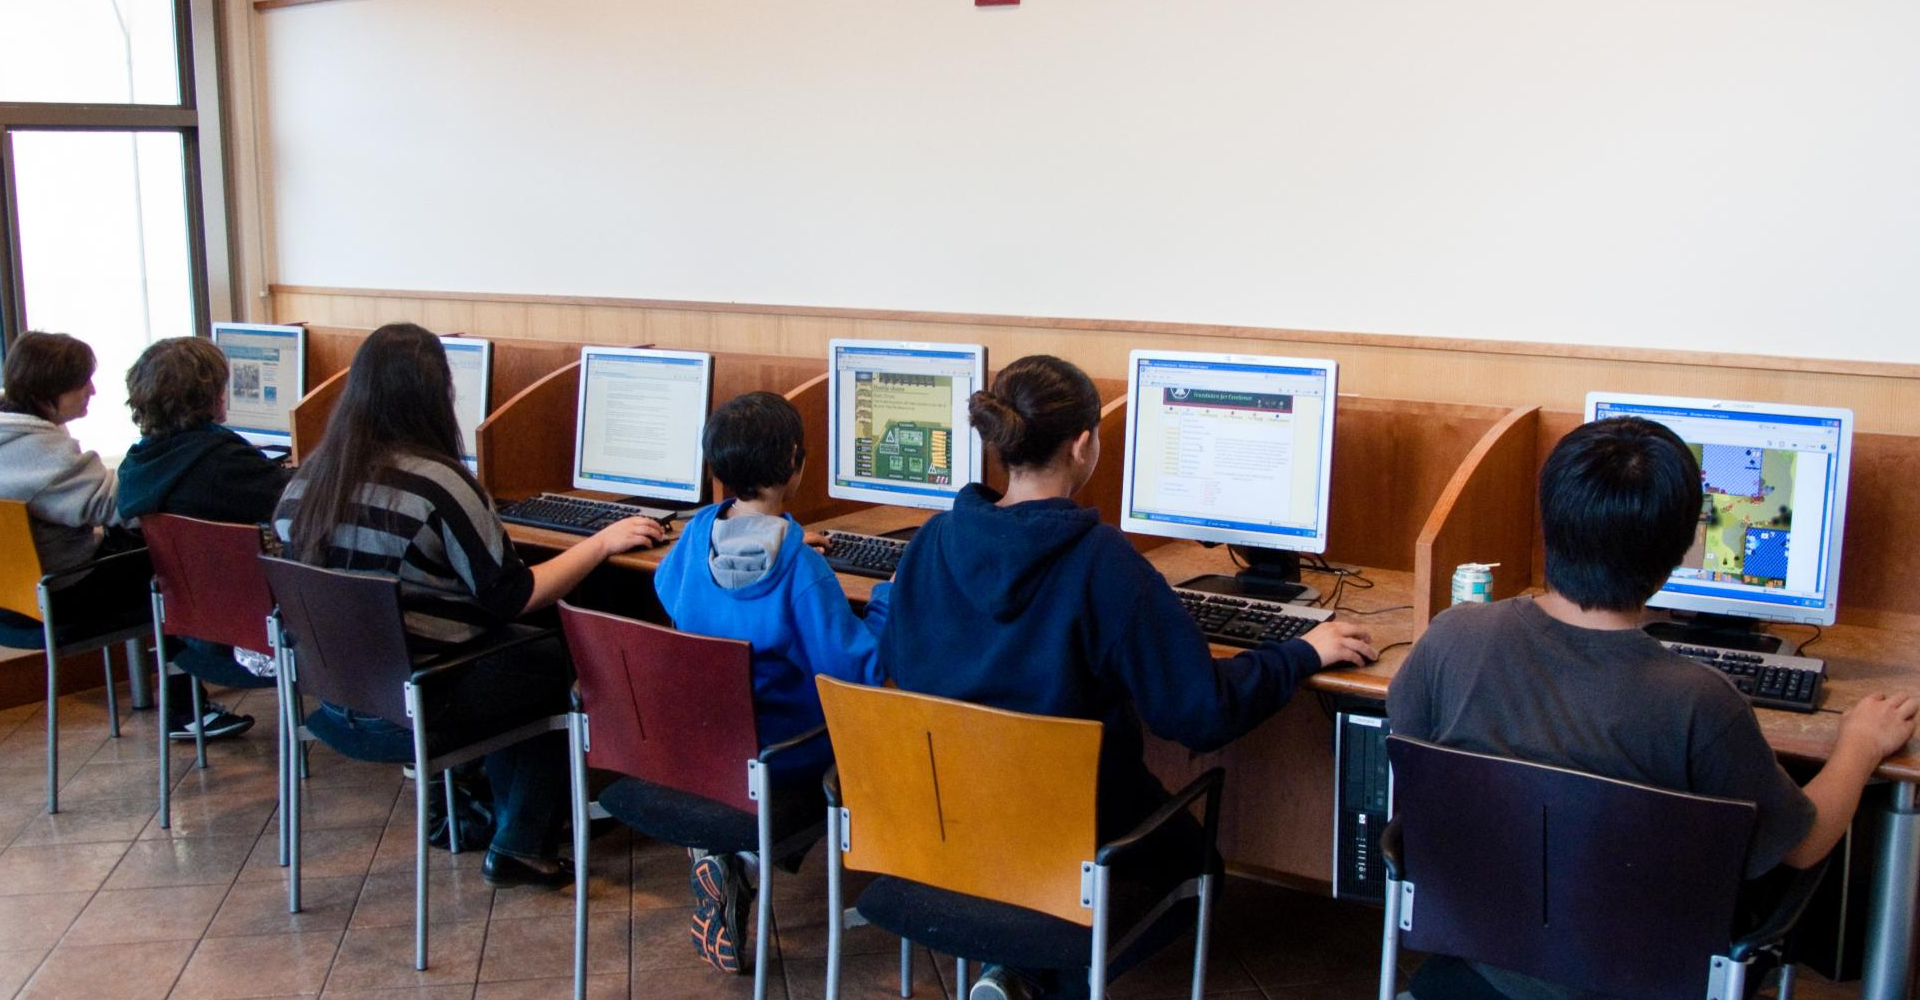 Internet Cafe Computers (adapted) (Image by San José Library [CC BY-SA 2.0] via Flickr)